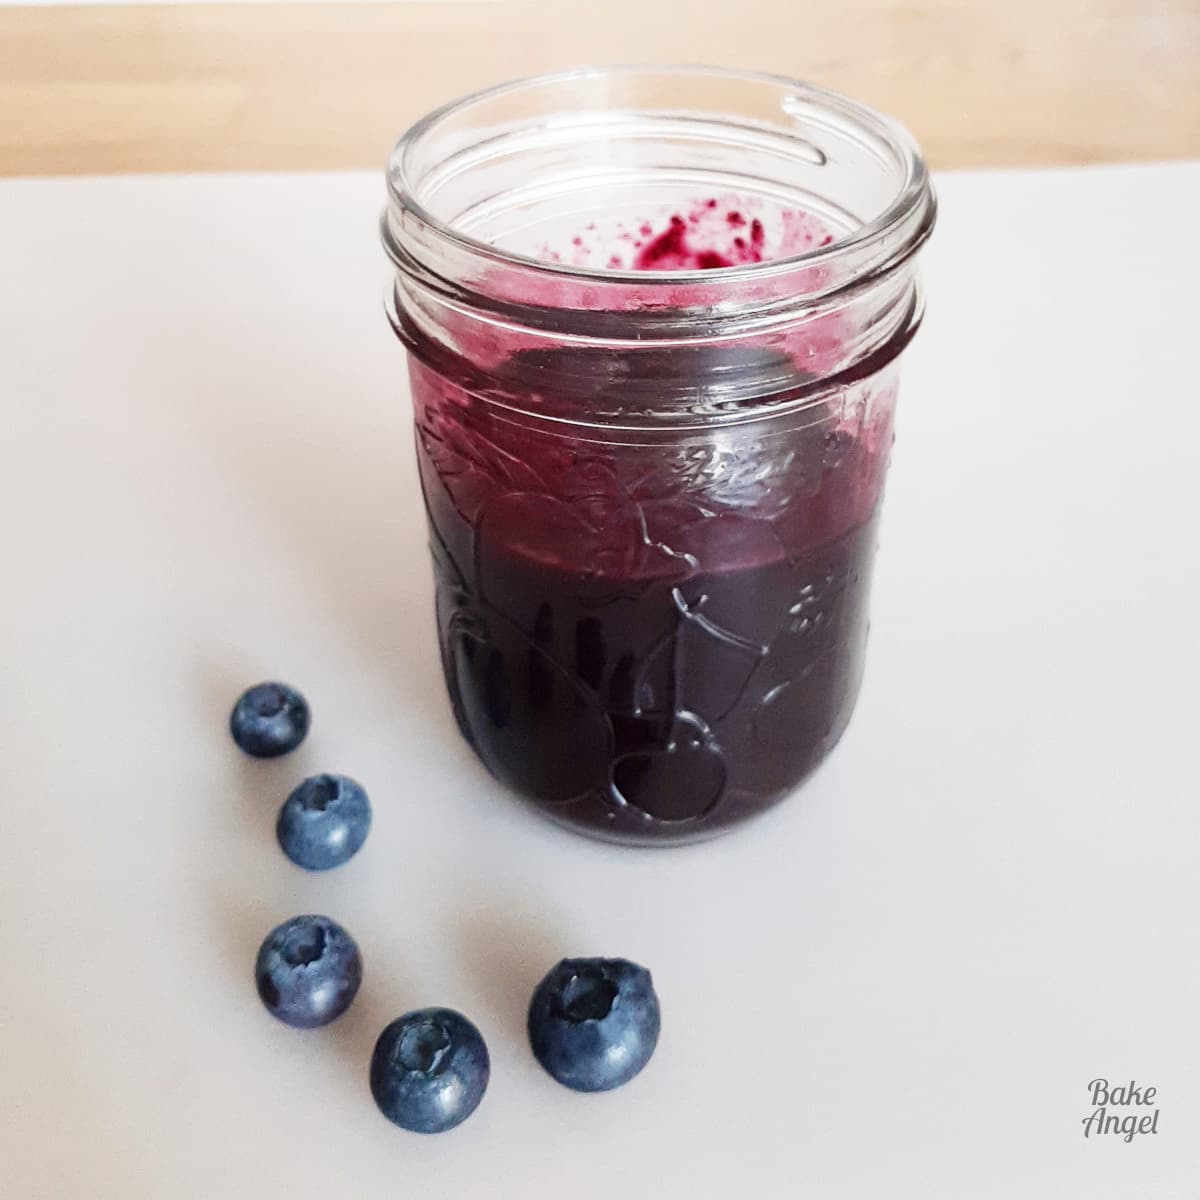 A glass mason jar filled with blueberry compote with 5 blueberries next to it on a white counter.